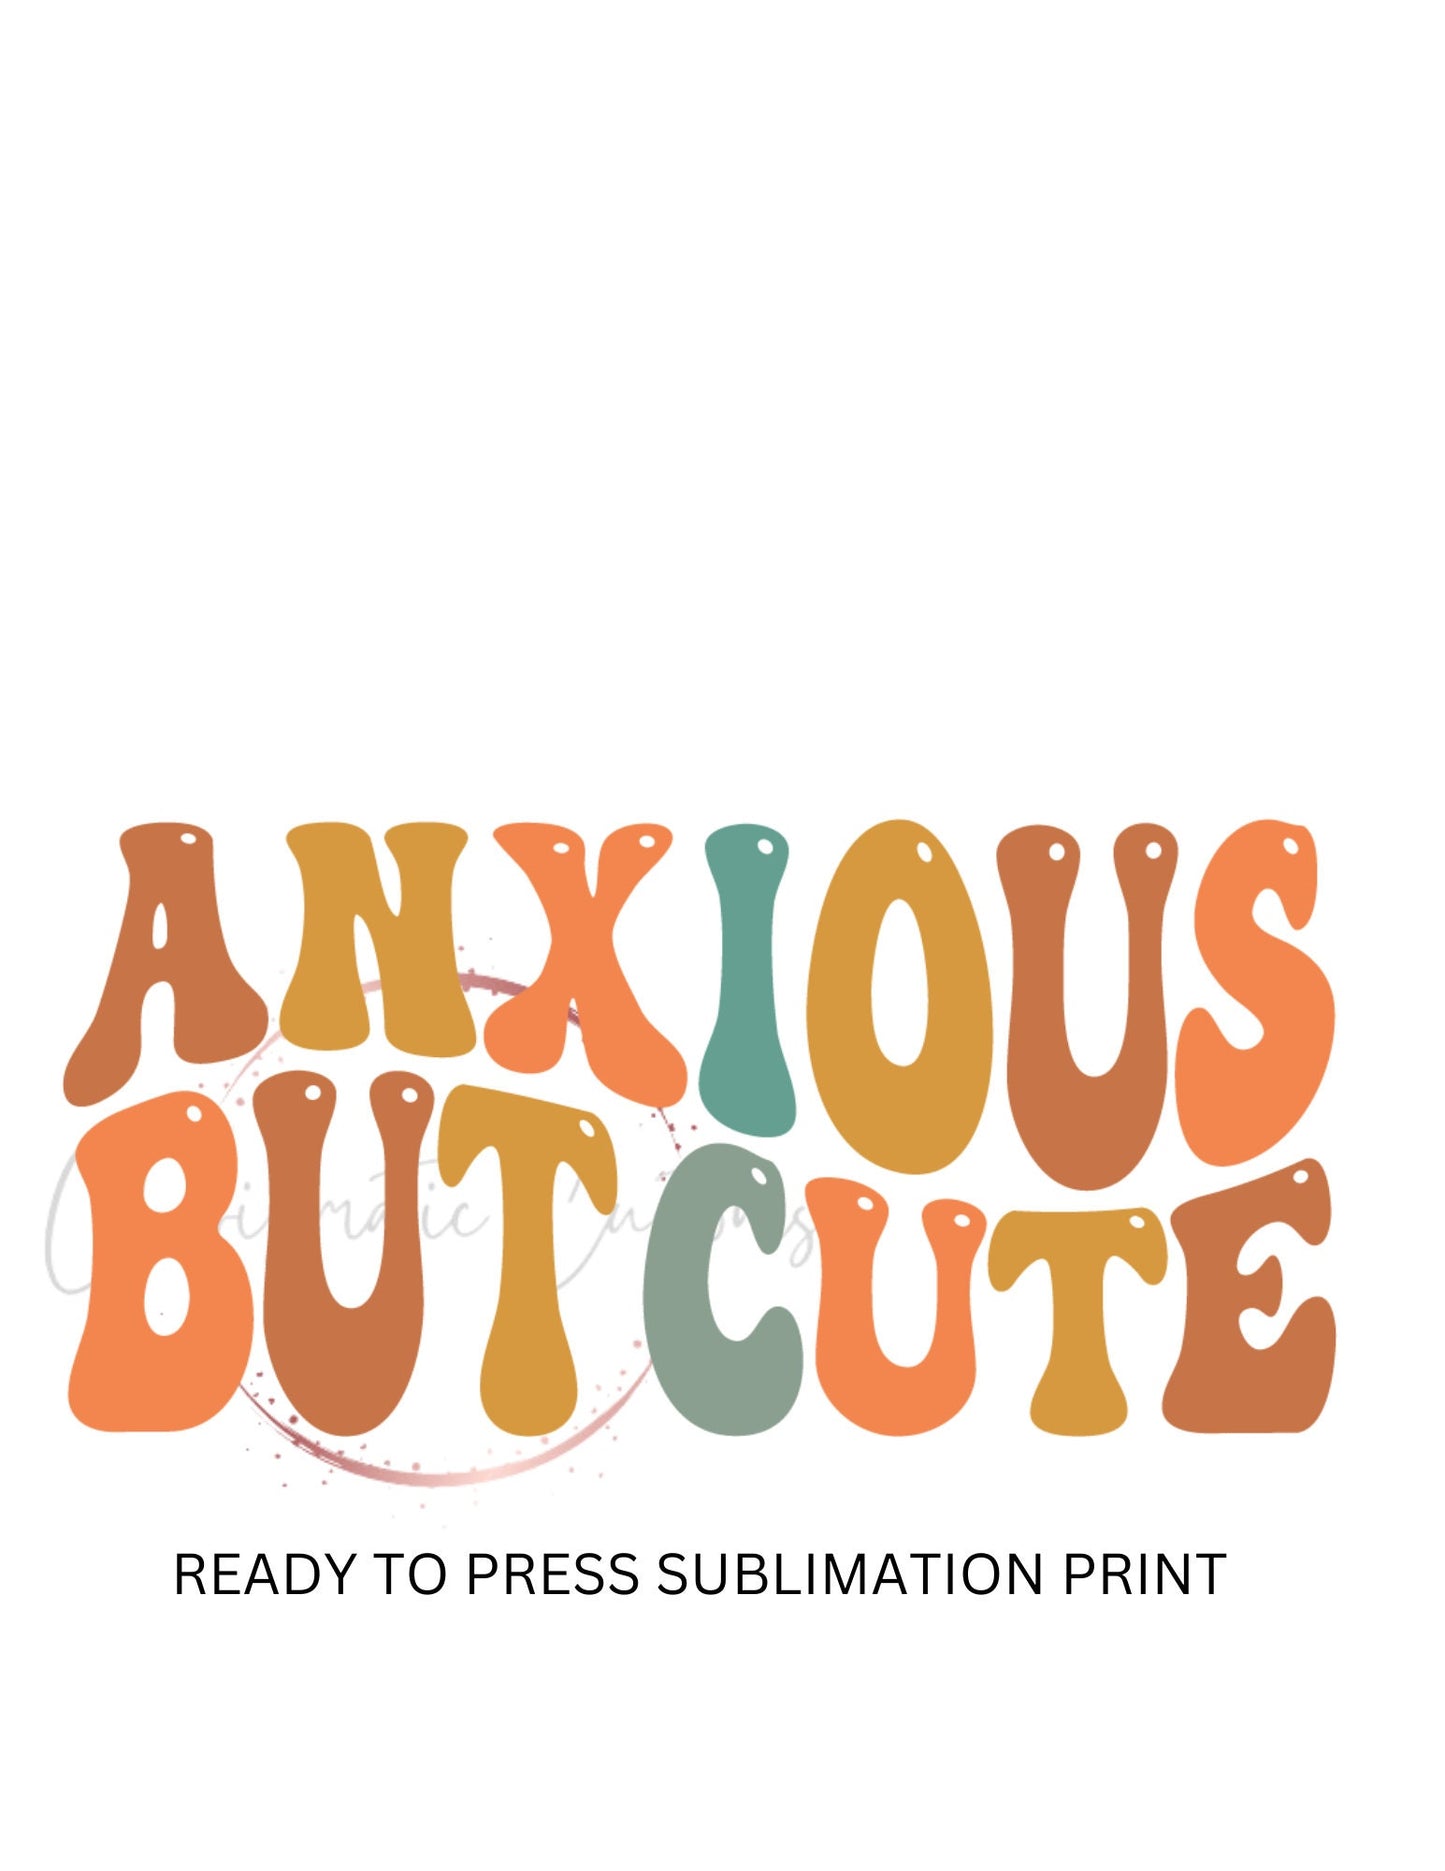 Anxious but cute - Ready to Press Sublimation Print Transfer